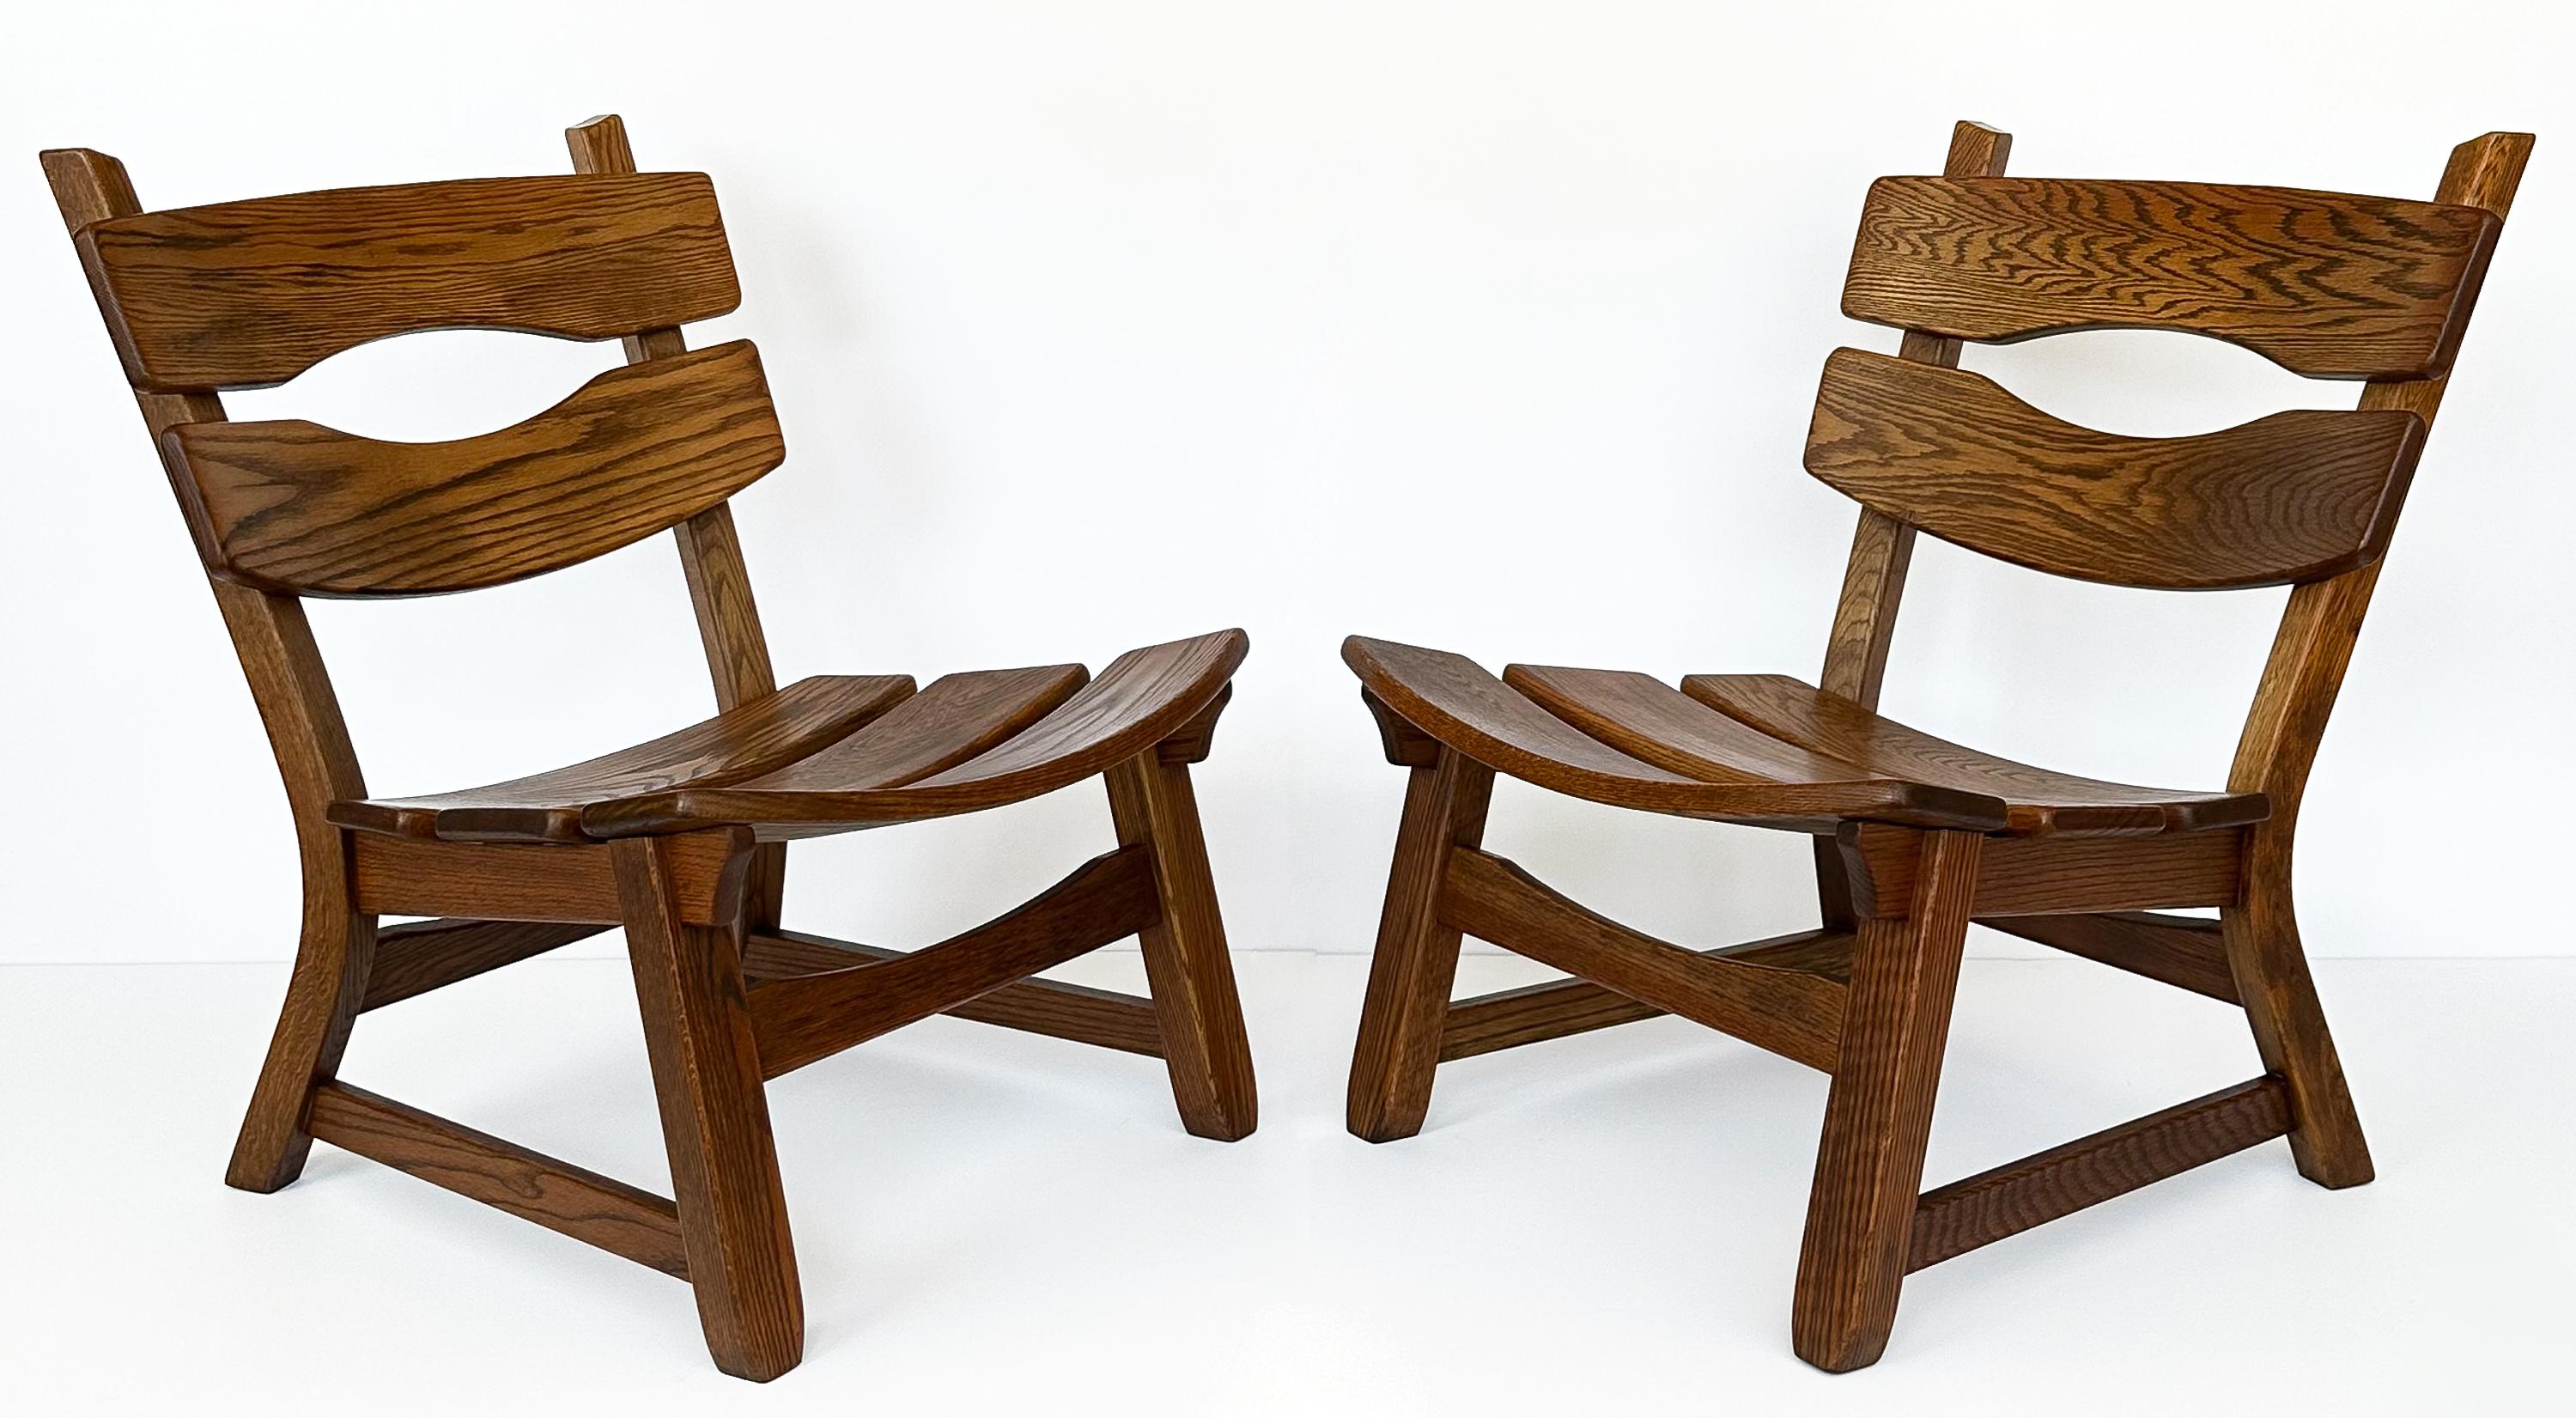 Embrace the bold character of the 1970s with this stunning pair of rustic modernist solid oak lounge chairs by Dittmann & Co for AWA Radboud, hailing from the Netherlands. These armless lounge chairs are substantial in presence, crafted entirely